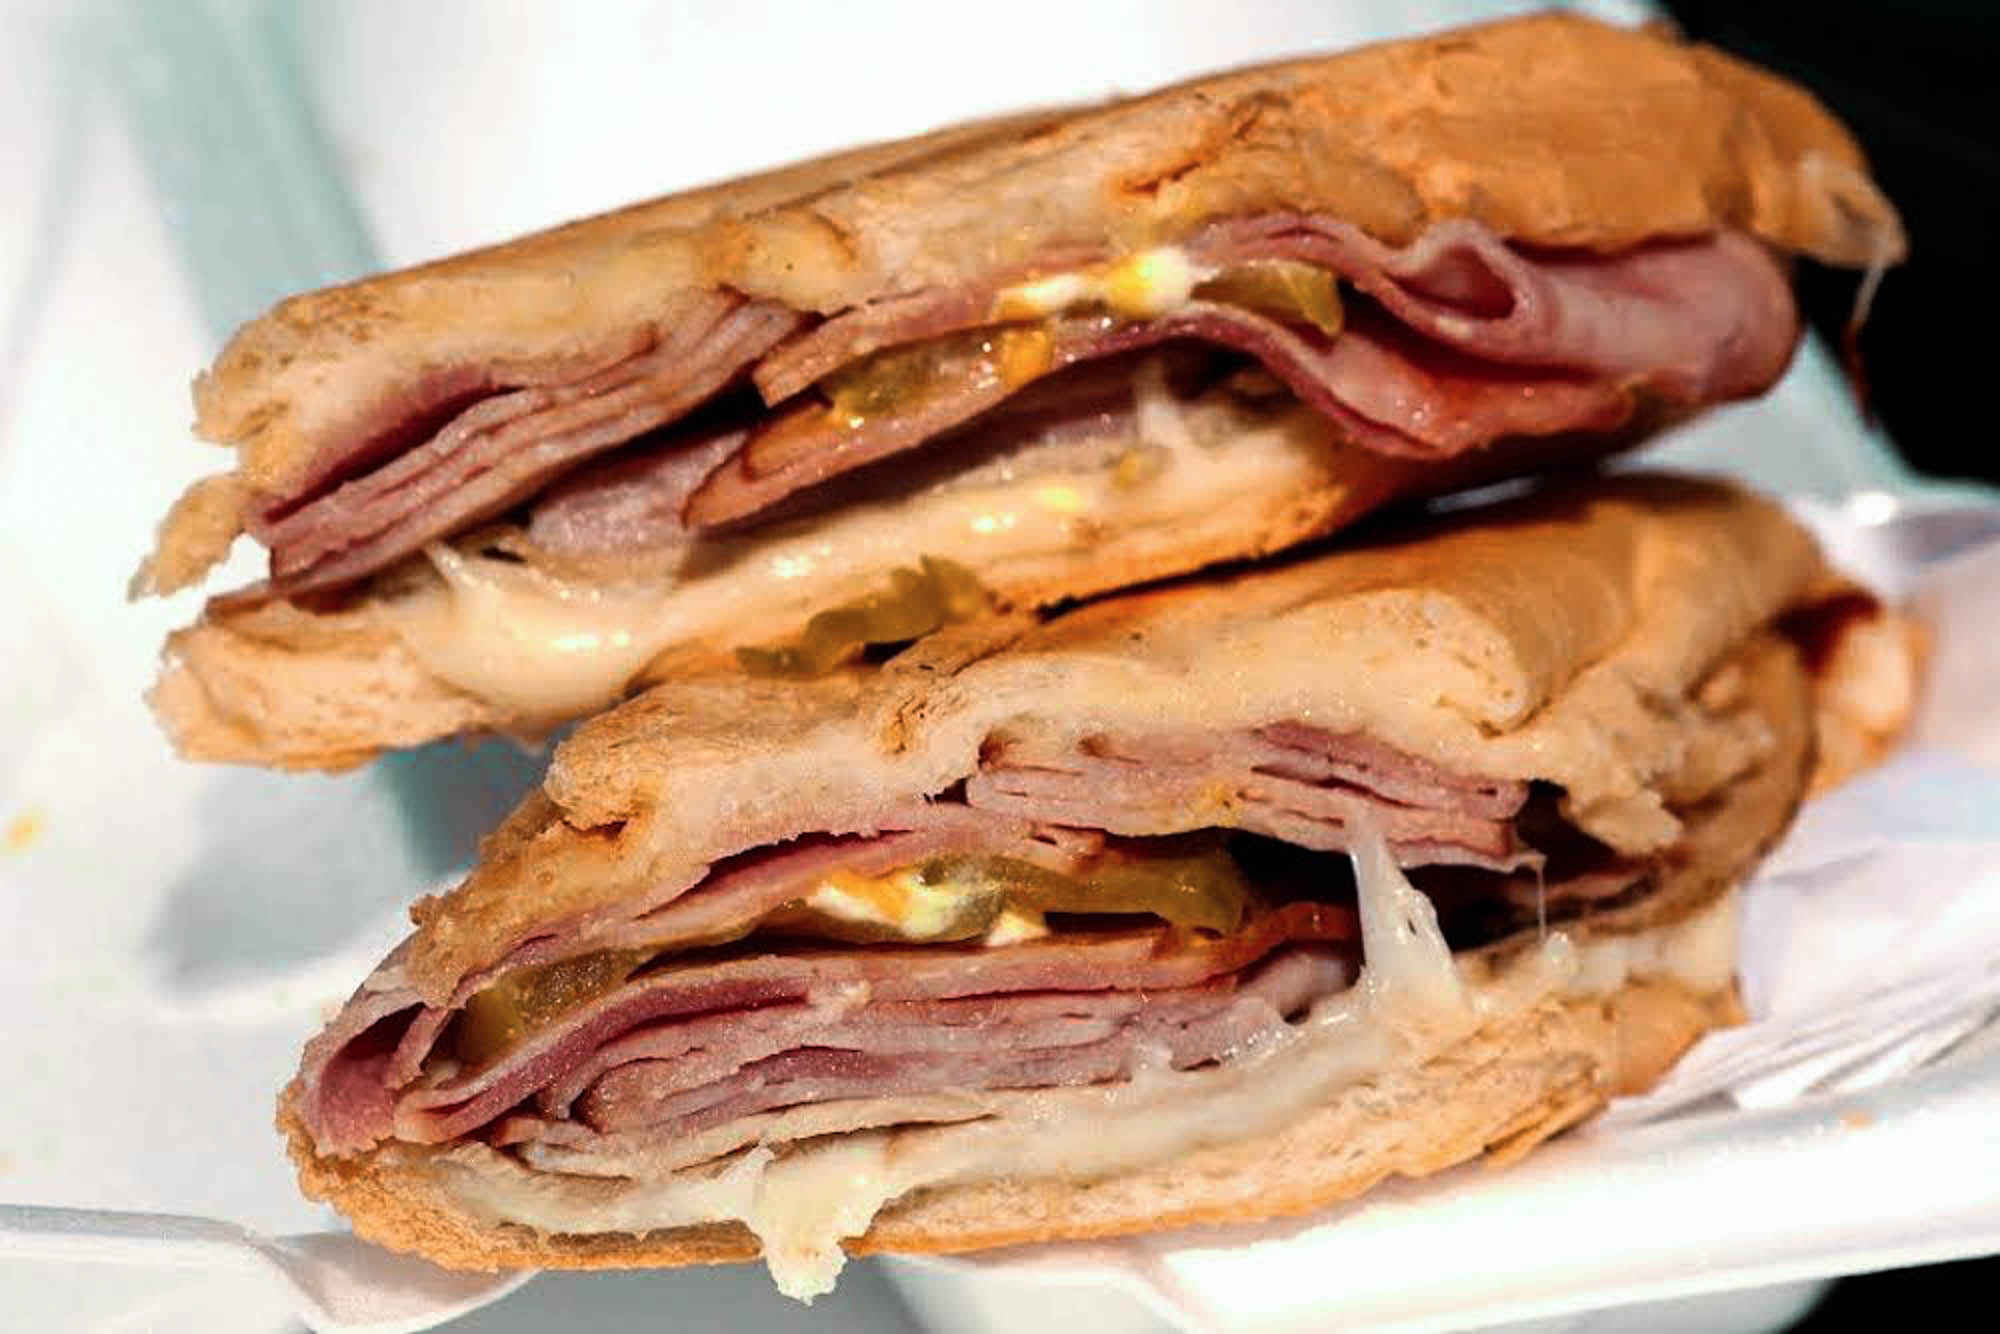 50 Sandwiches You Should Eat Before You Die | HuffPost